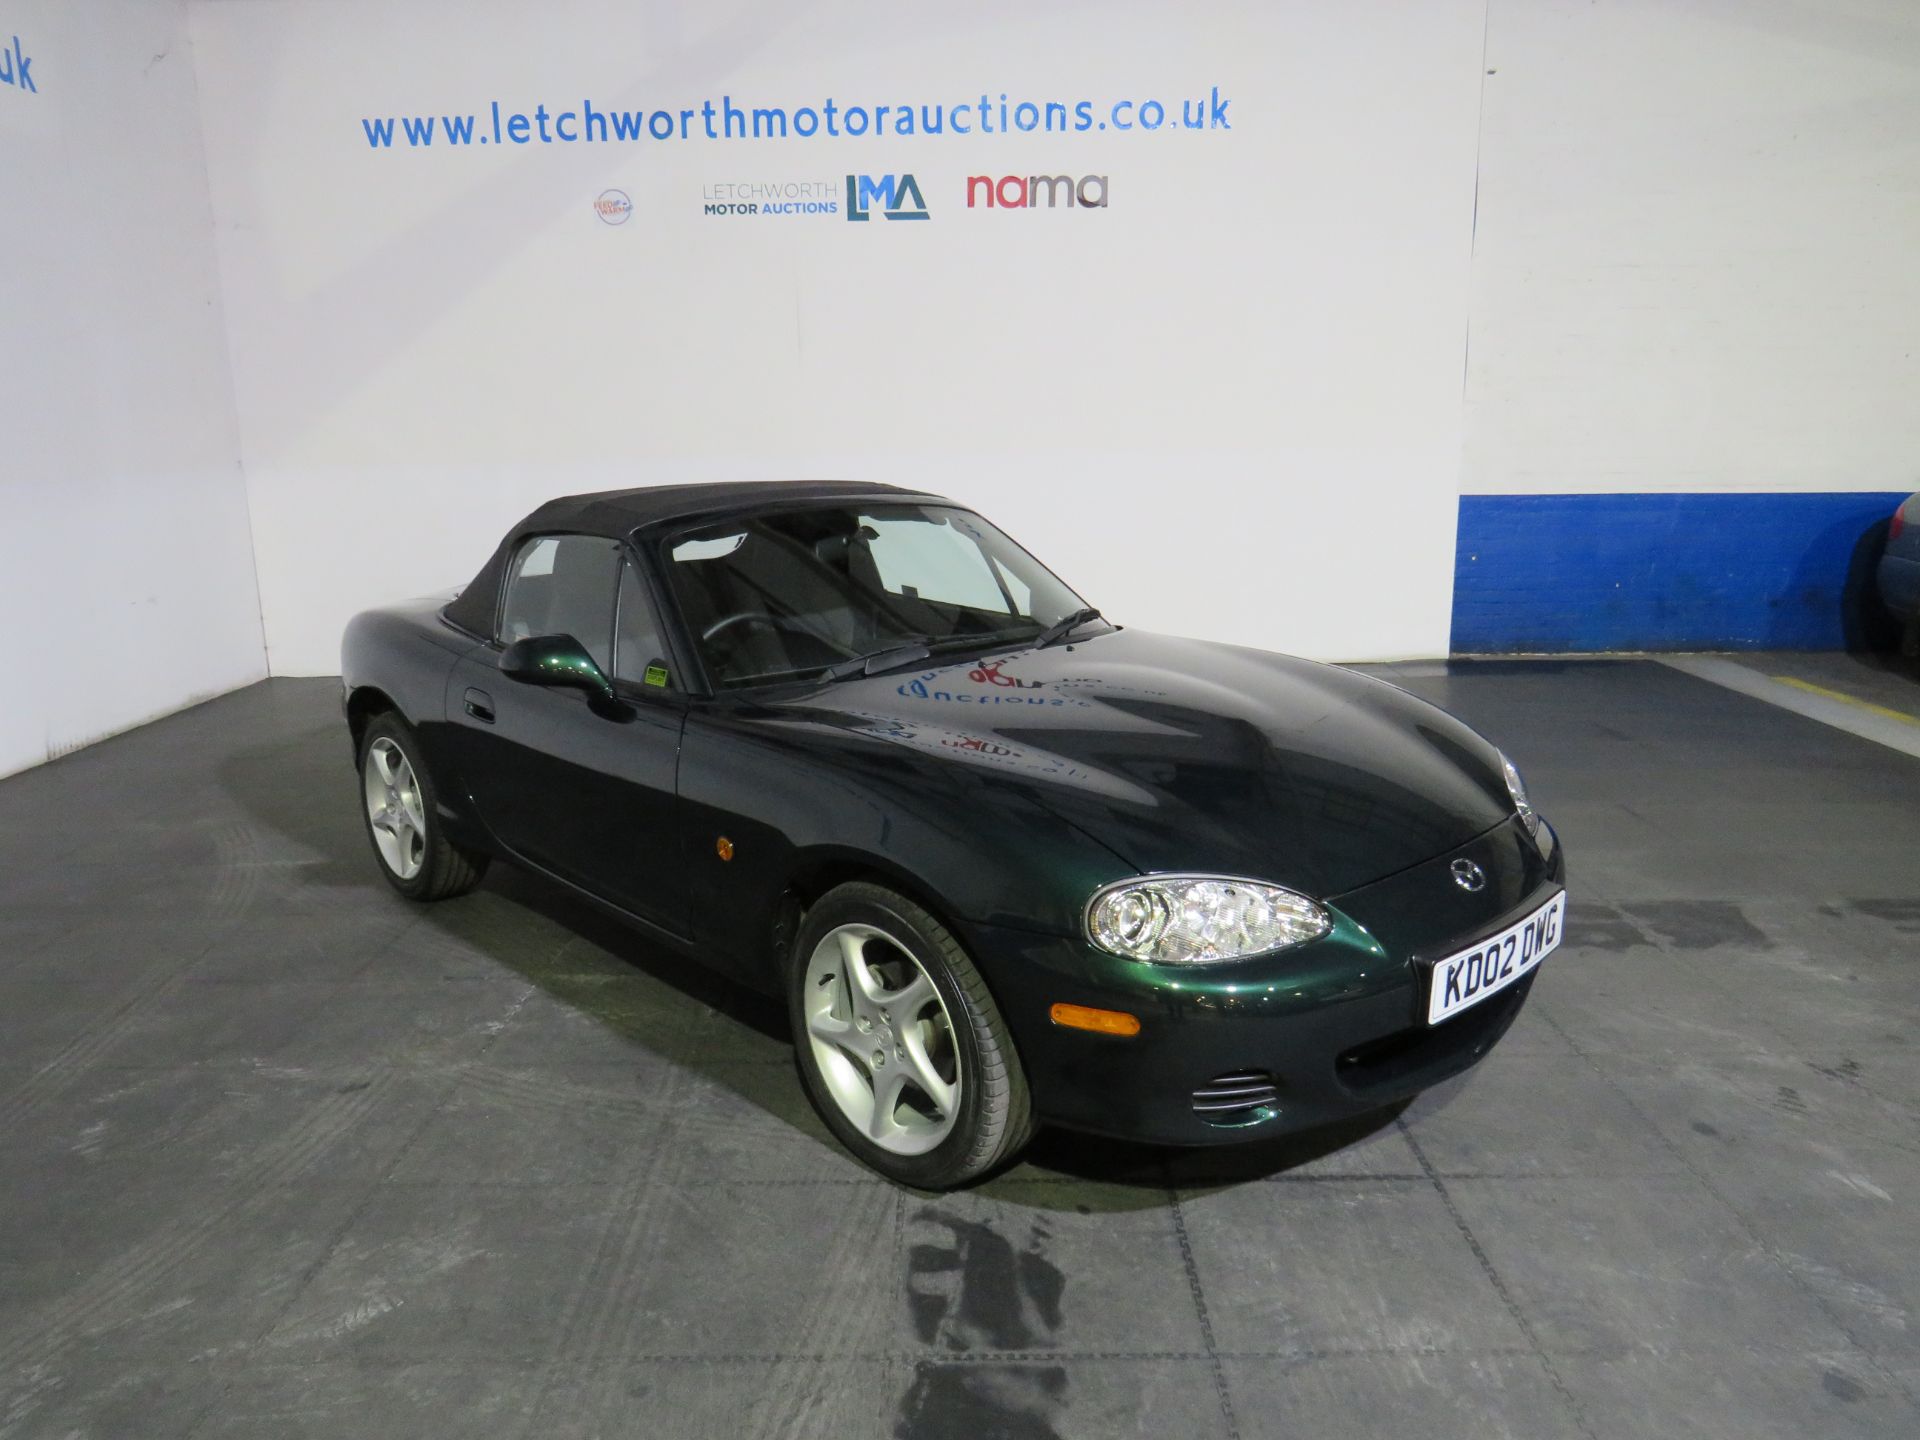 2002 Mazda MX-5 - 1598cc - 1,900 MILES FROM NEW - Image 2 of 39